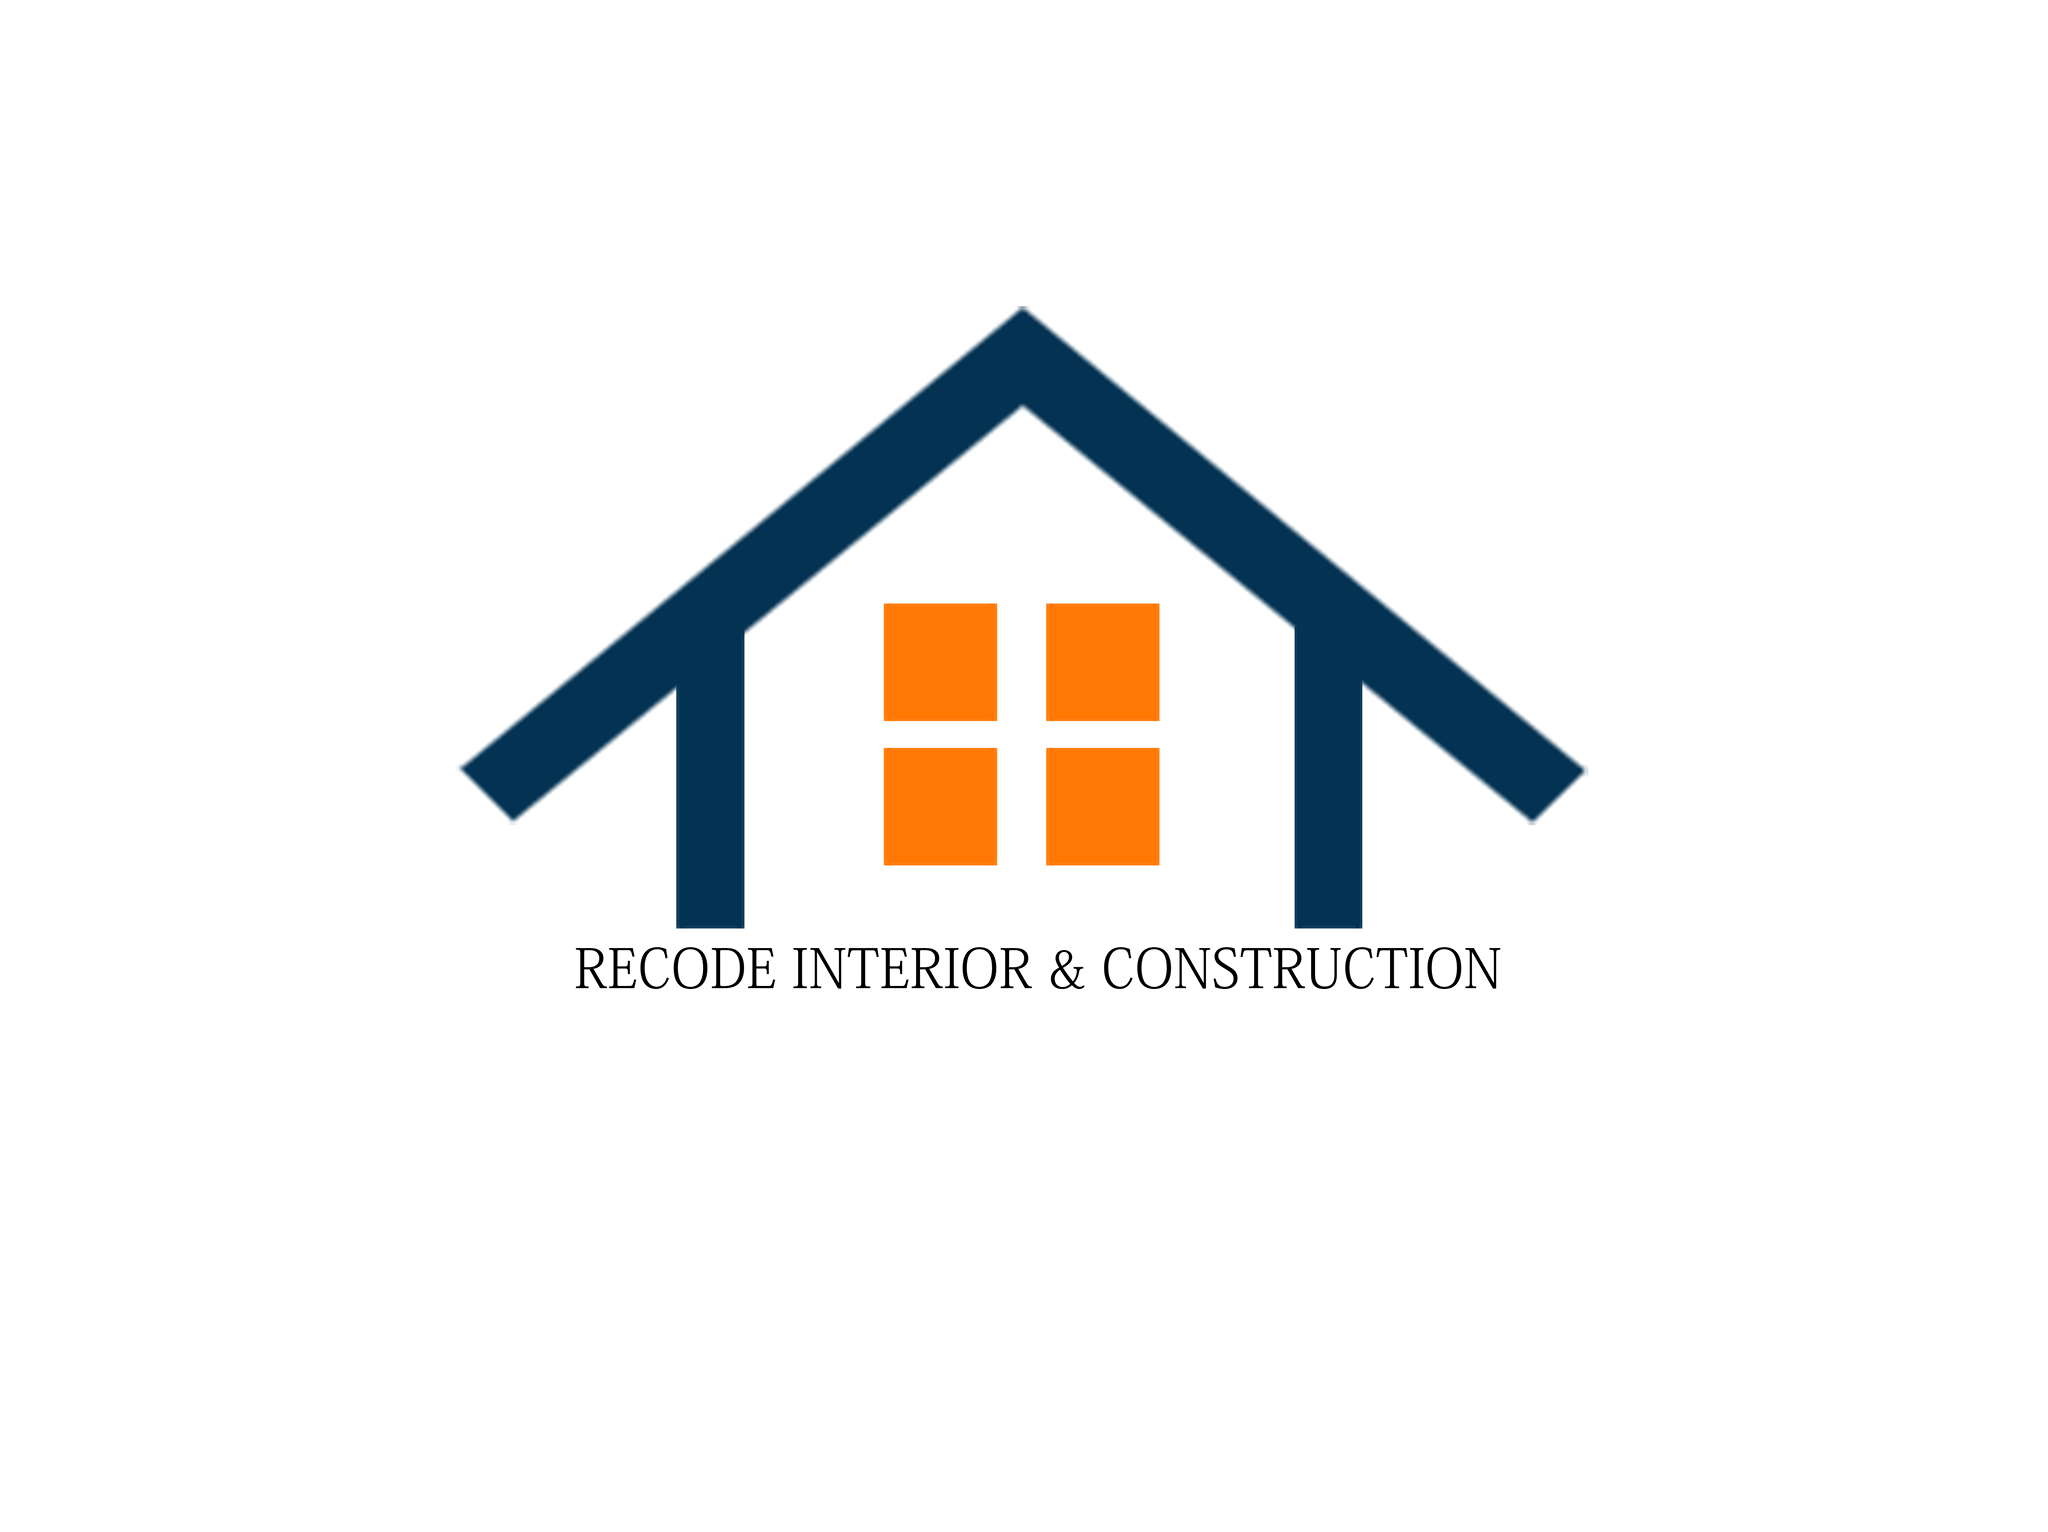 RECODE INTERIOR & CONSTRUCTION|Legal Services|Professional Services